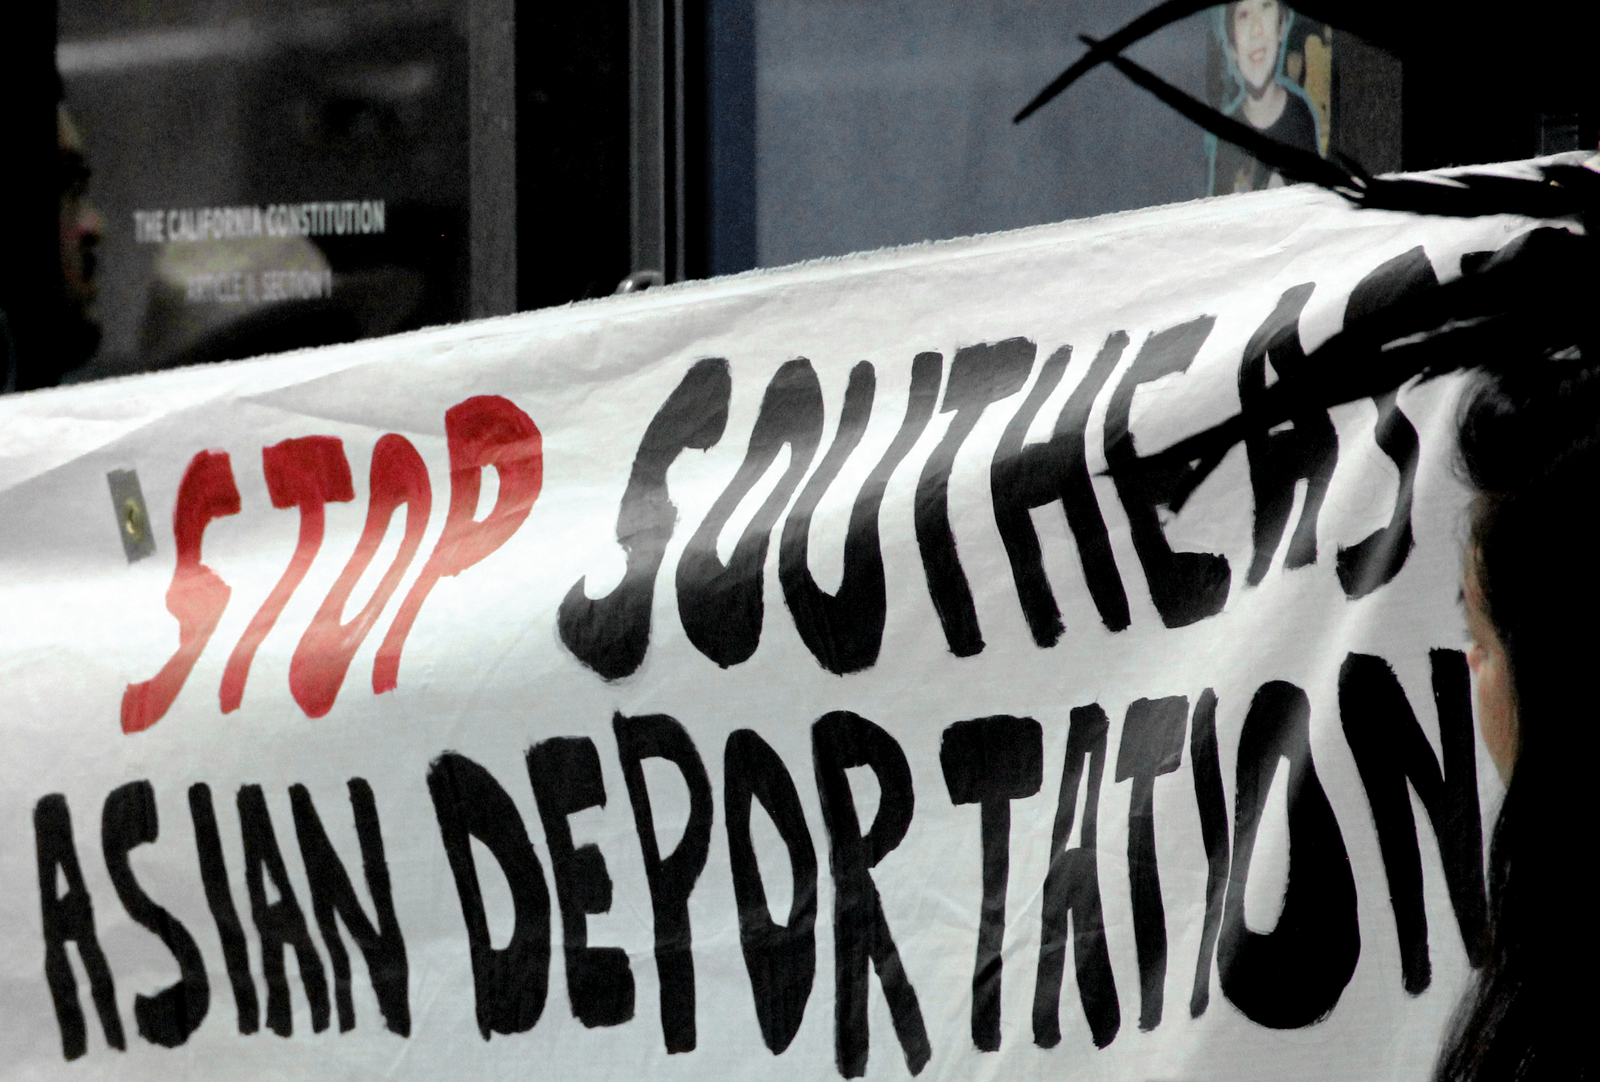 Banner reads "STOP SOUTHEAST ASIAN DEPORTATION" - the "stop" is in red